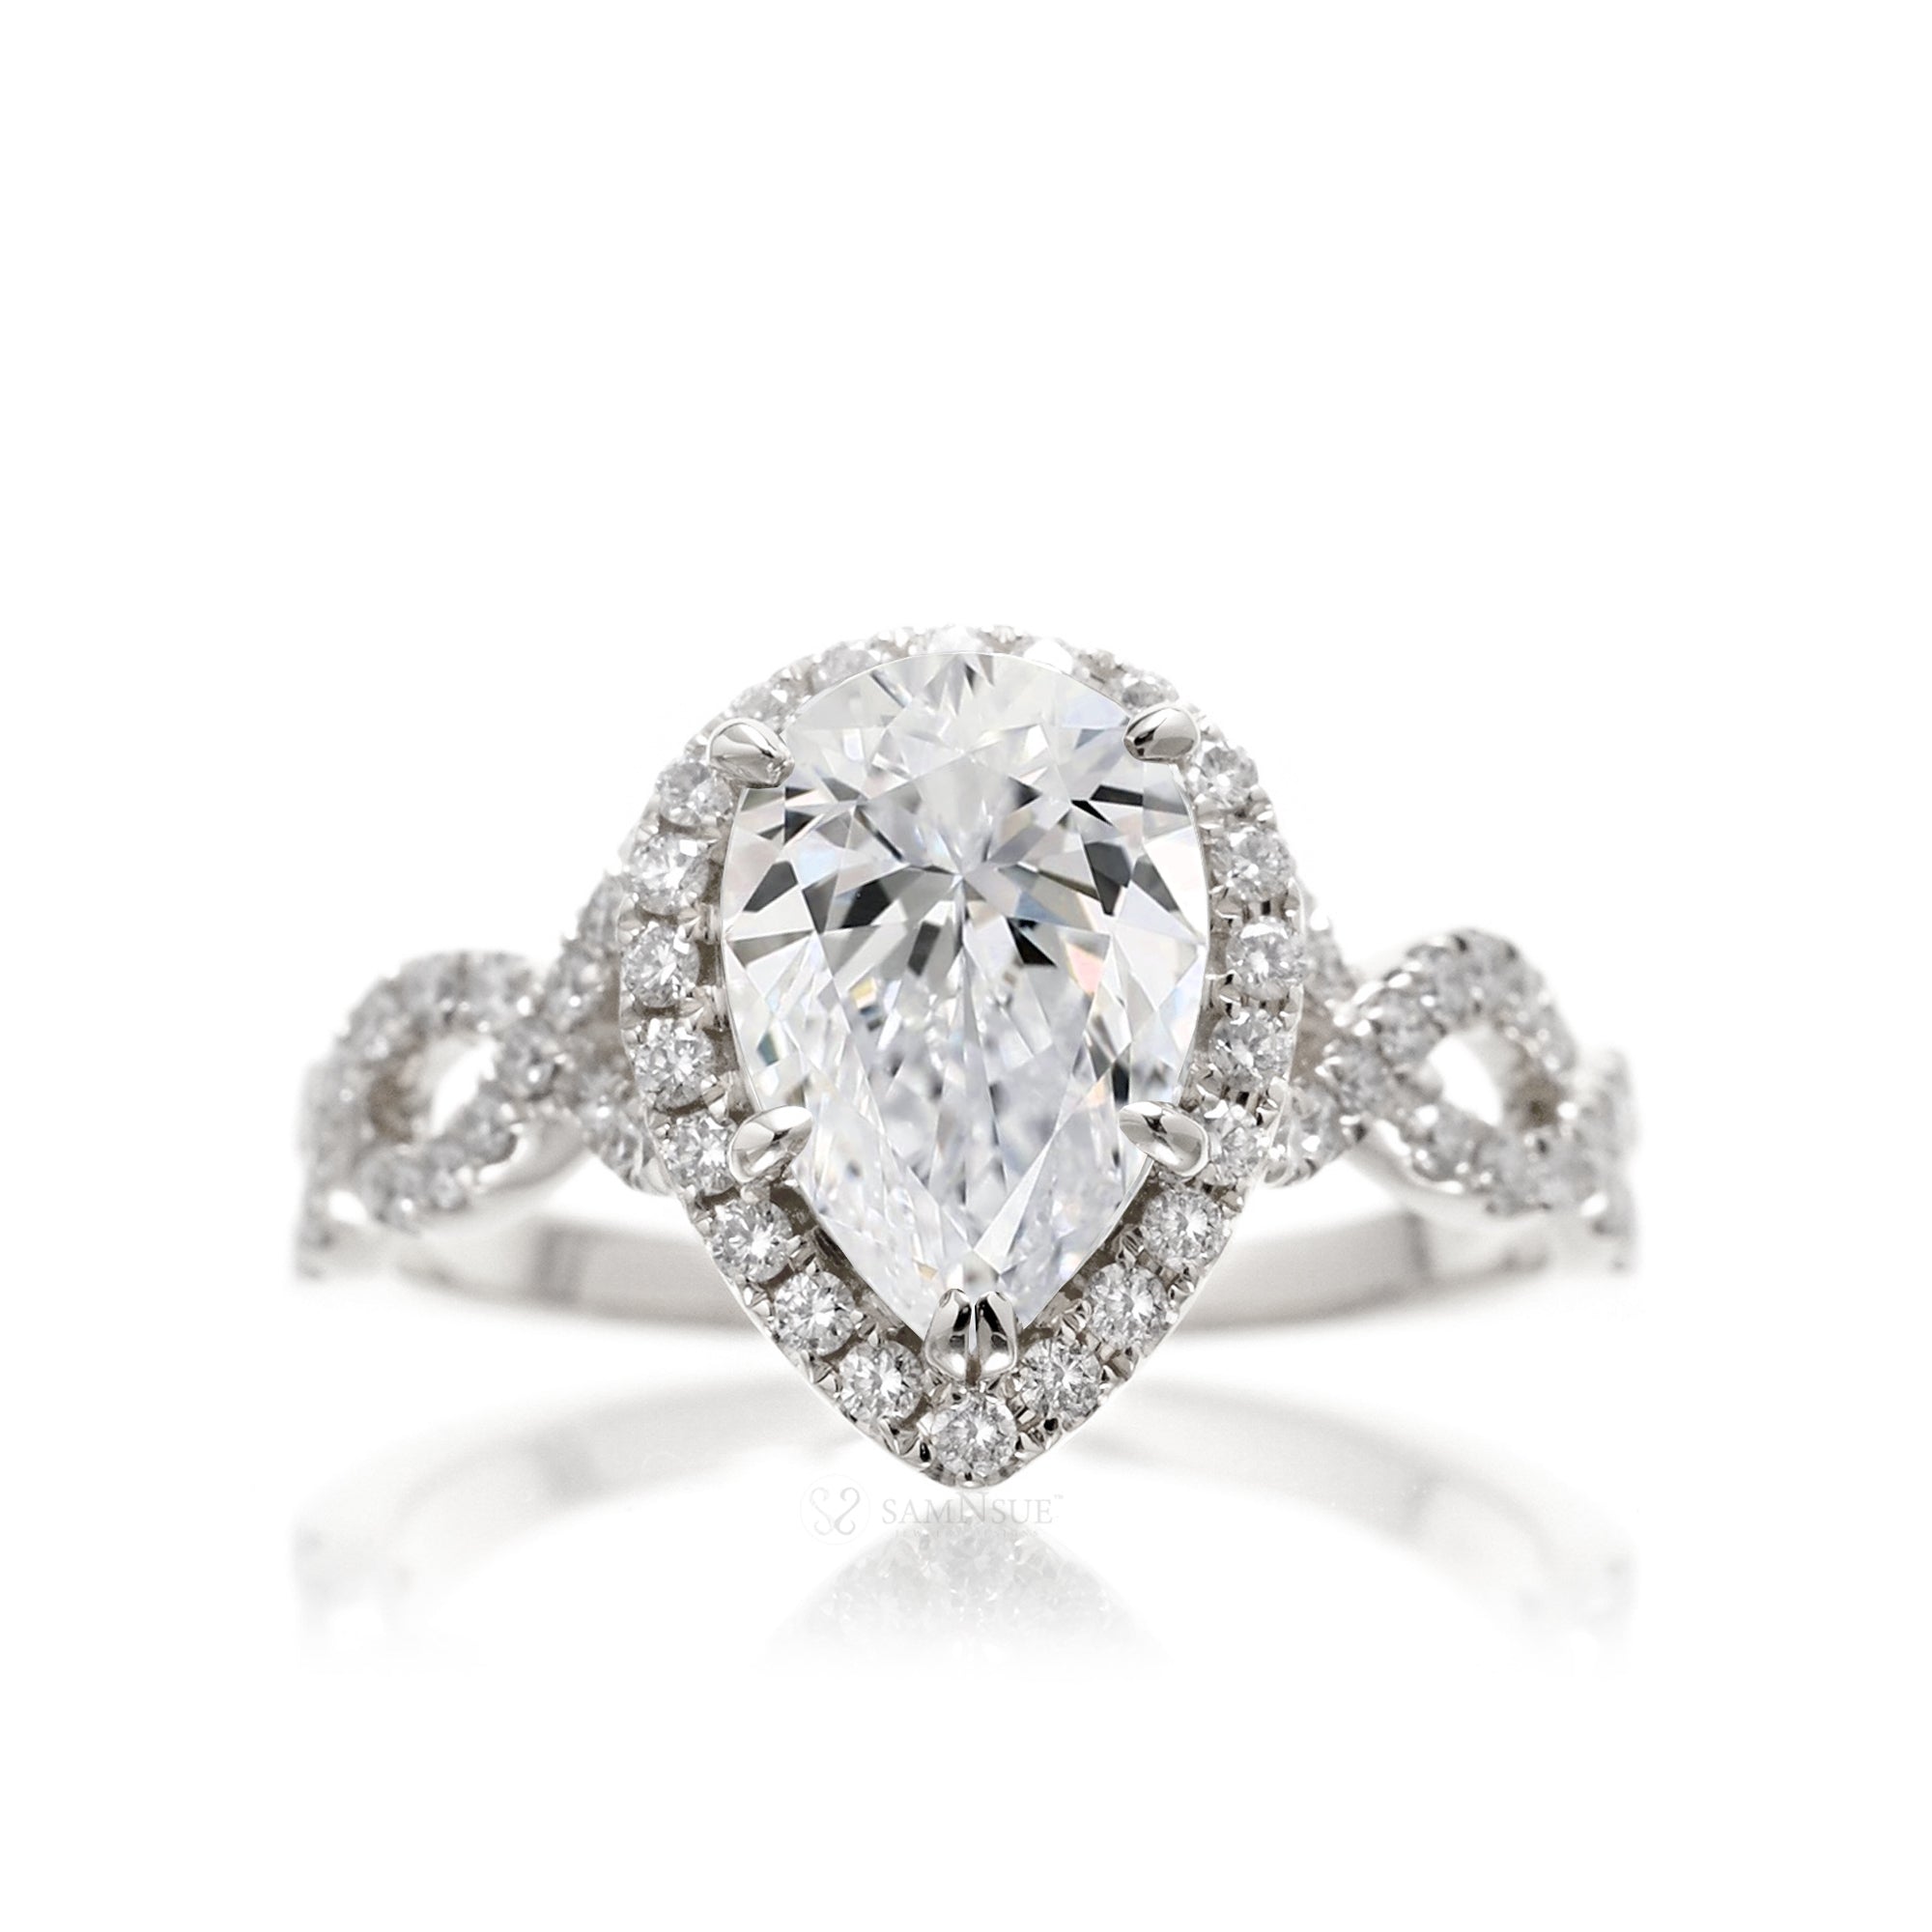 Pear diamond engagement ring halo and twist band white gold